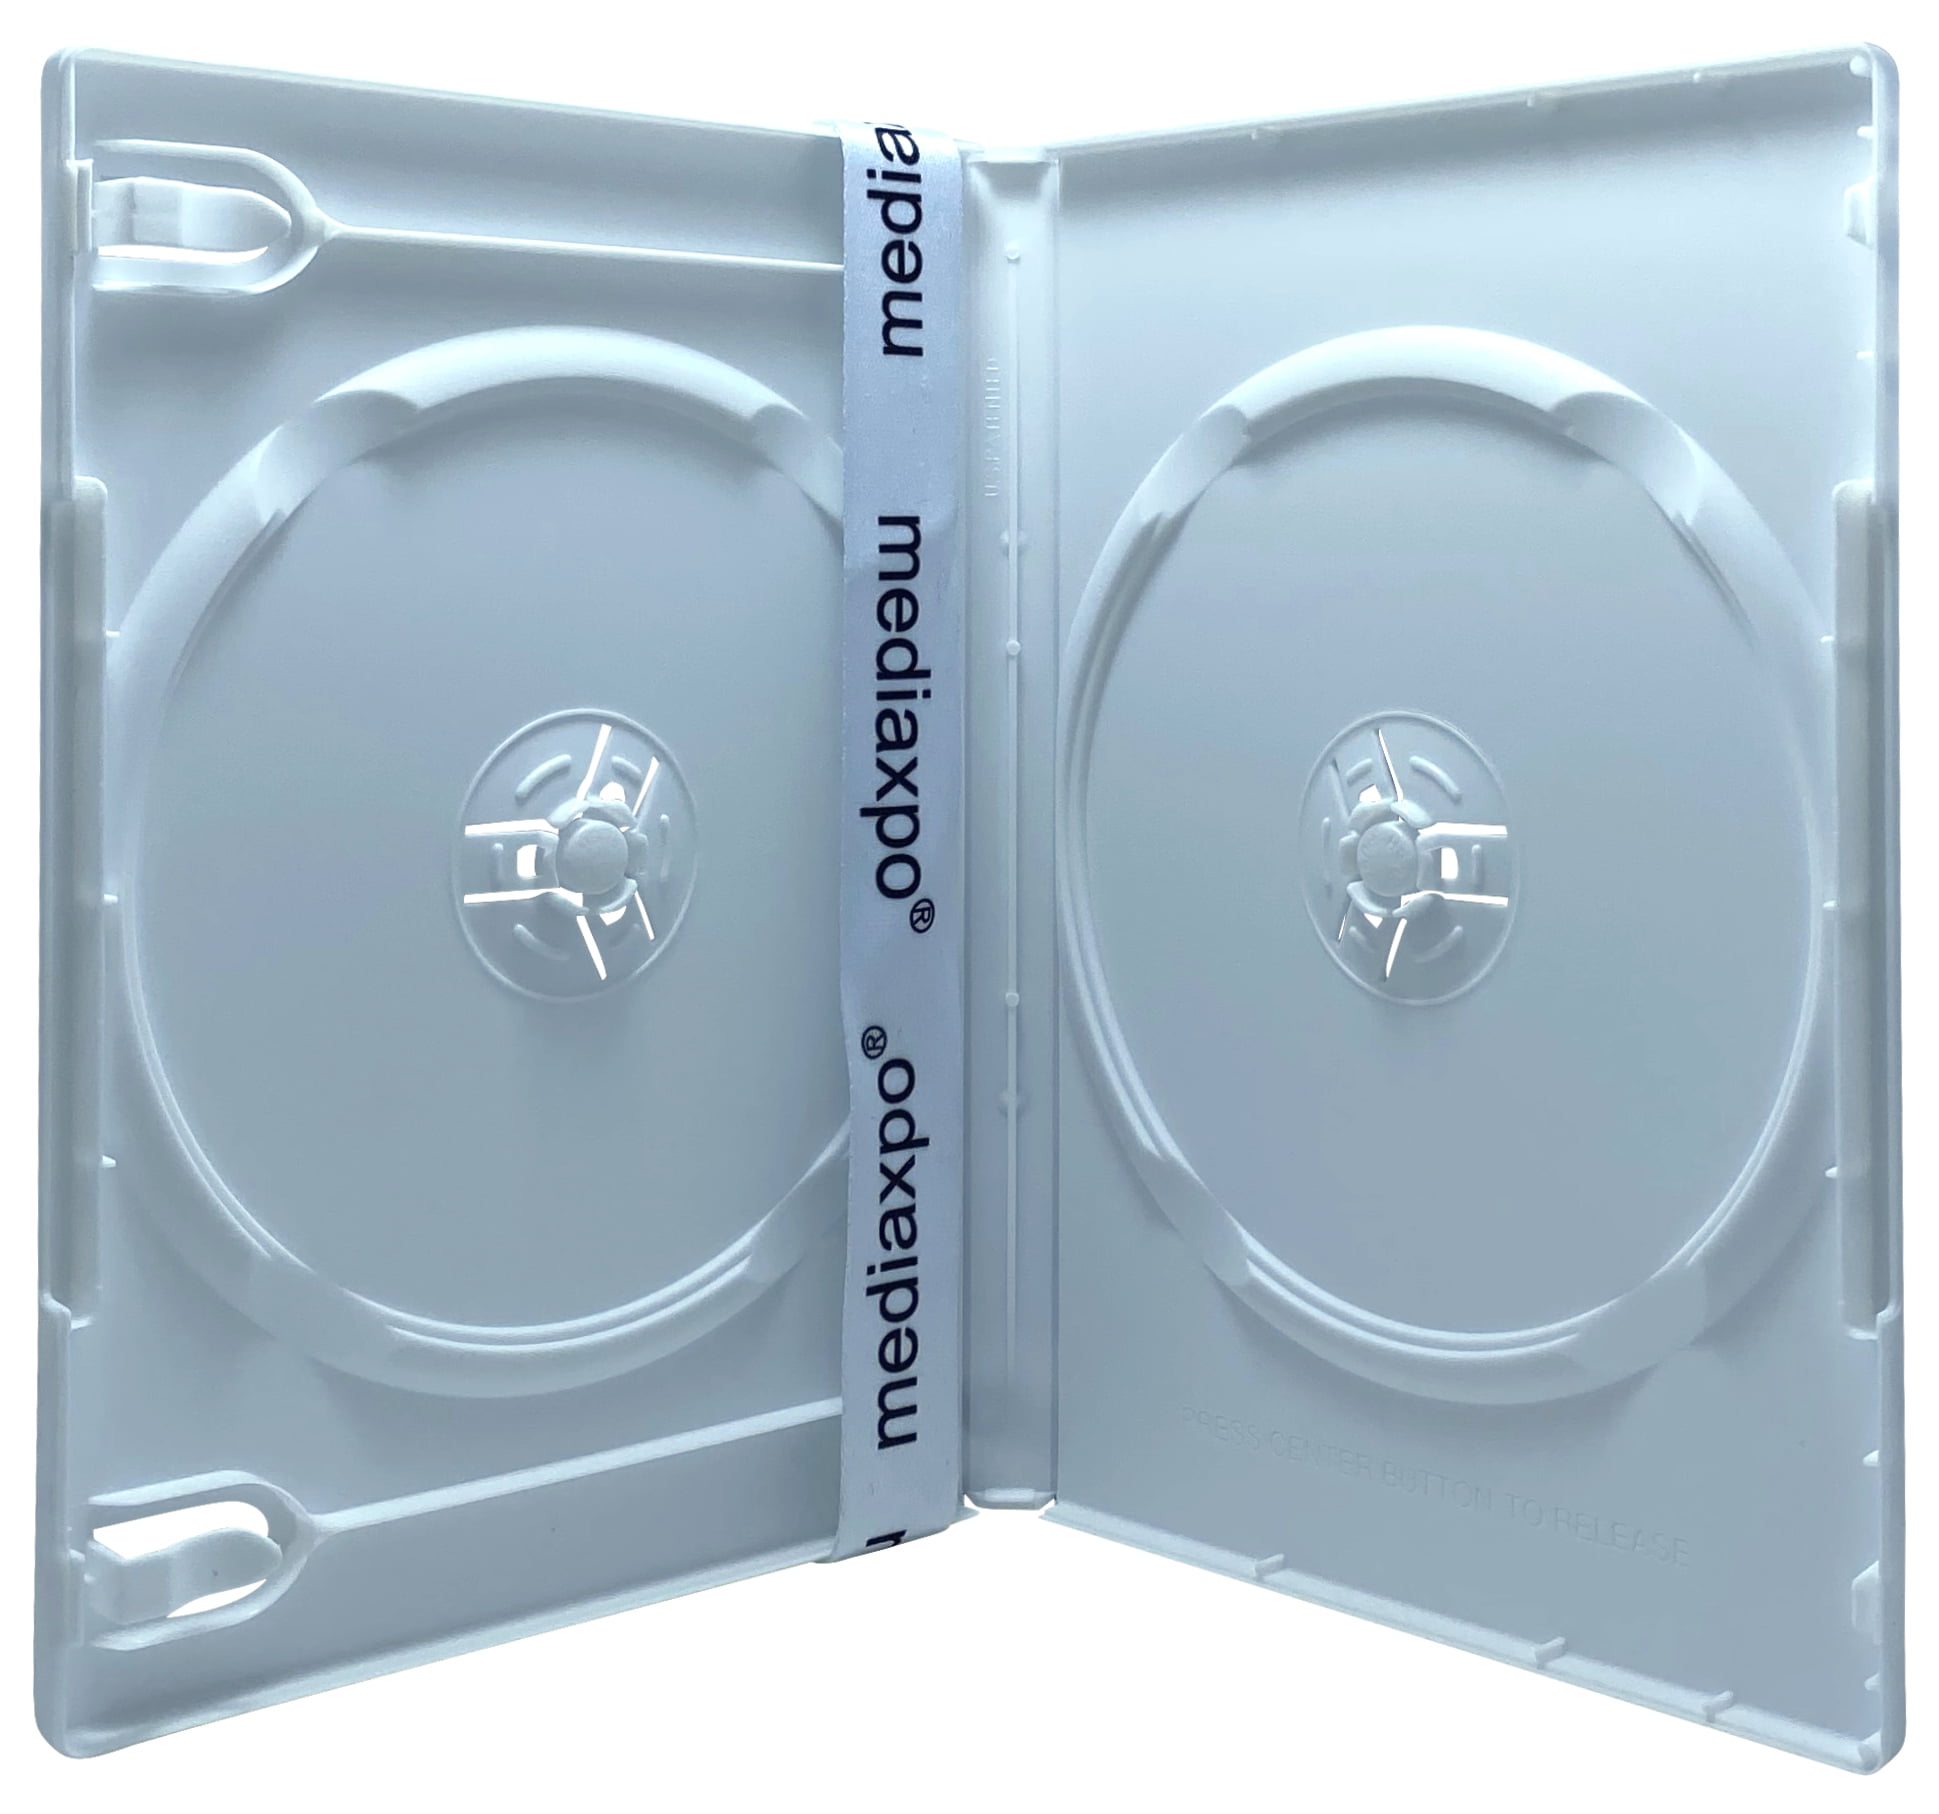 CheckOutStore 10 Premium Standard Solid White Color Double DVD Cases (100% New Material)